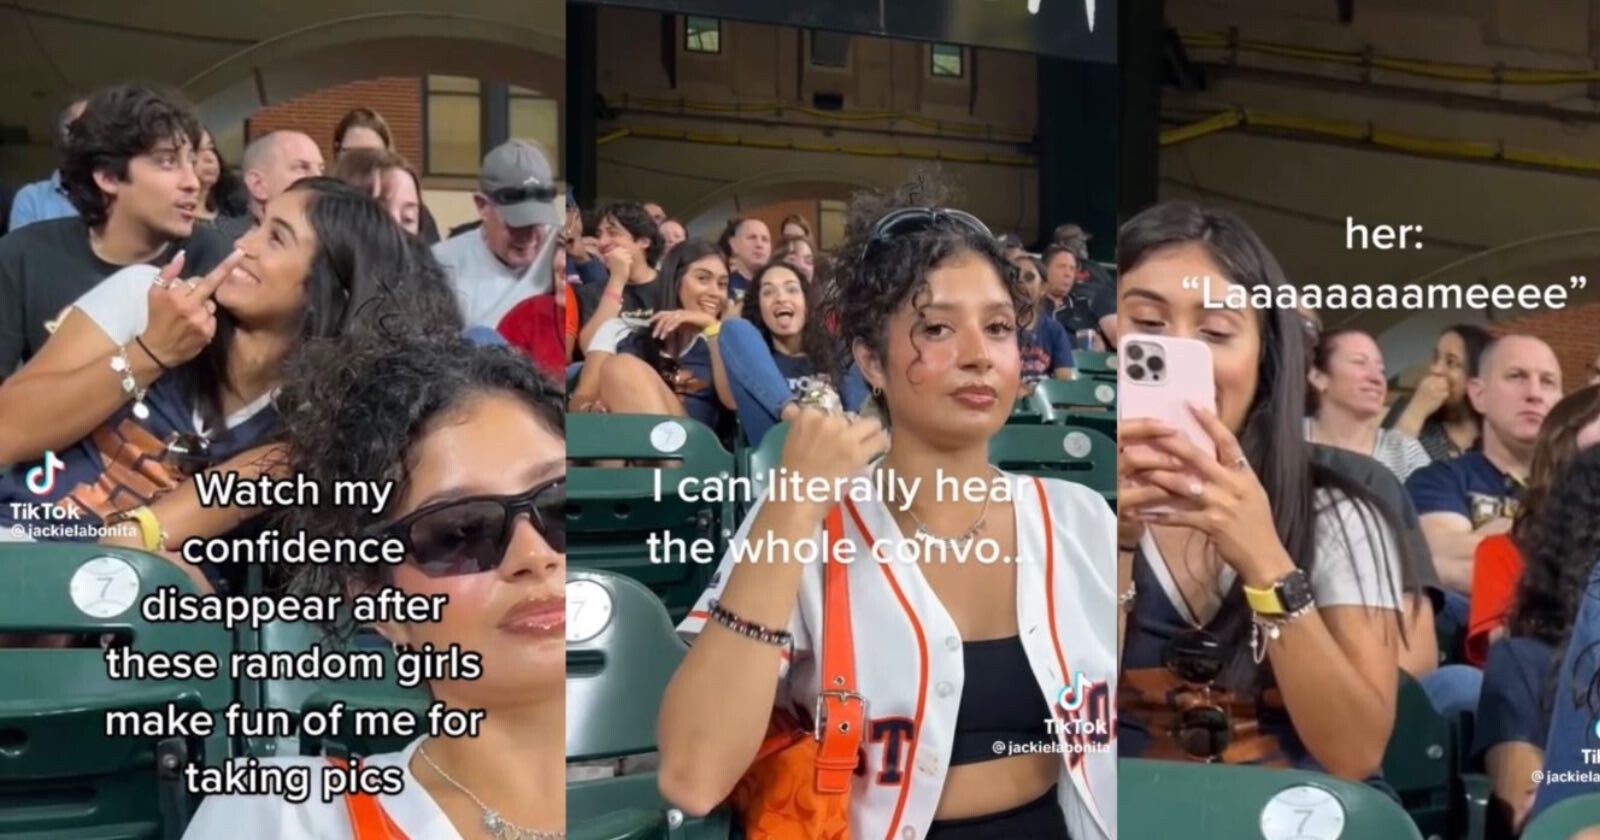 Outrage After Women Mock Influencer for Taking Photos at Baseball Game